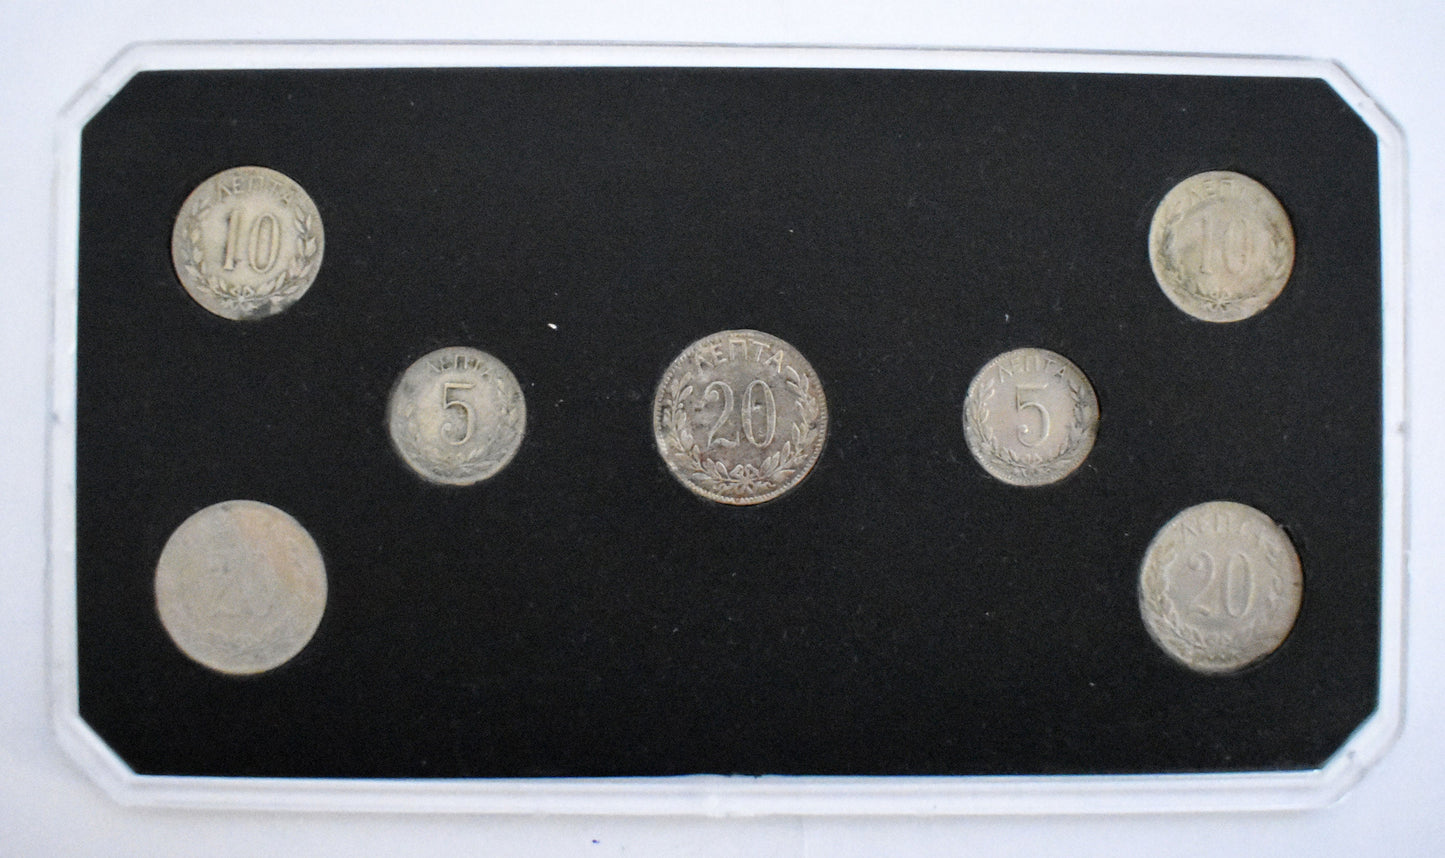 Drachmas - National Currency of Greece - Pre-Euro Coinage - Complete set of 1893 - 1894 - 1895  -  Original Coins Collection